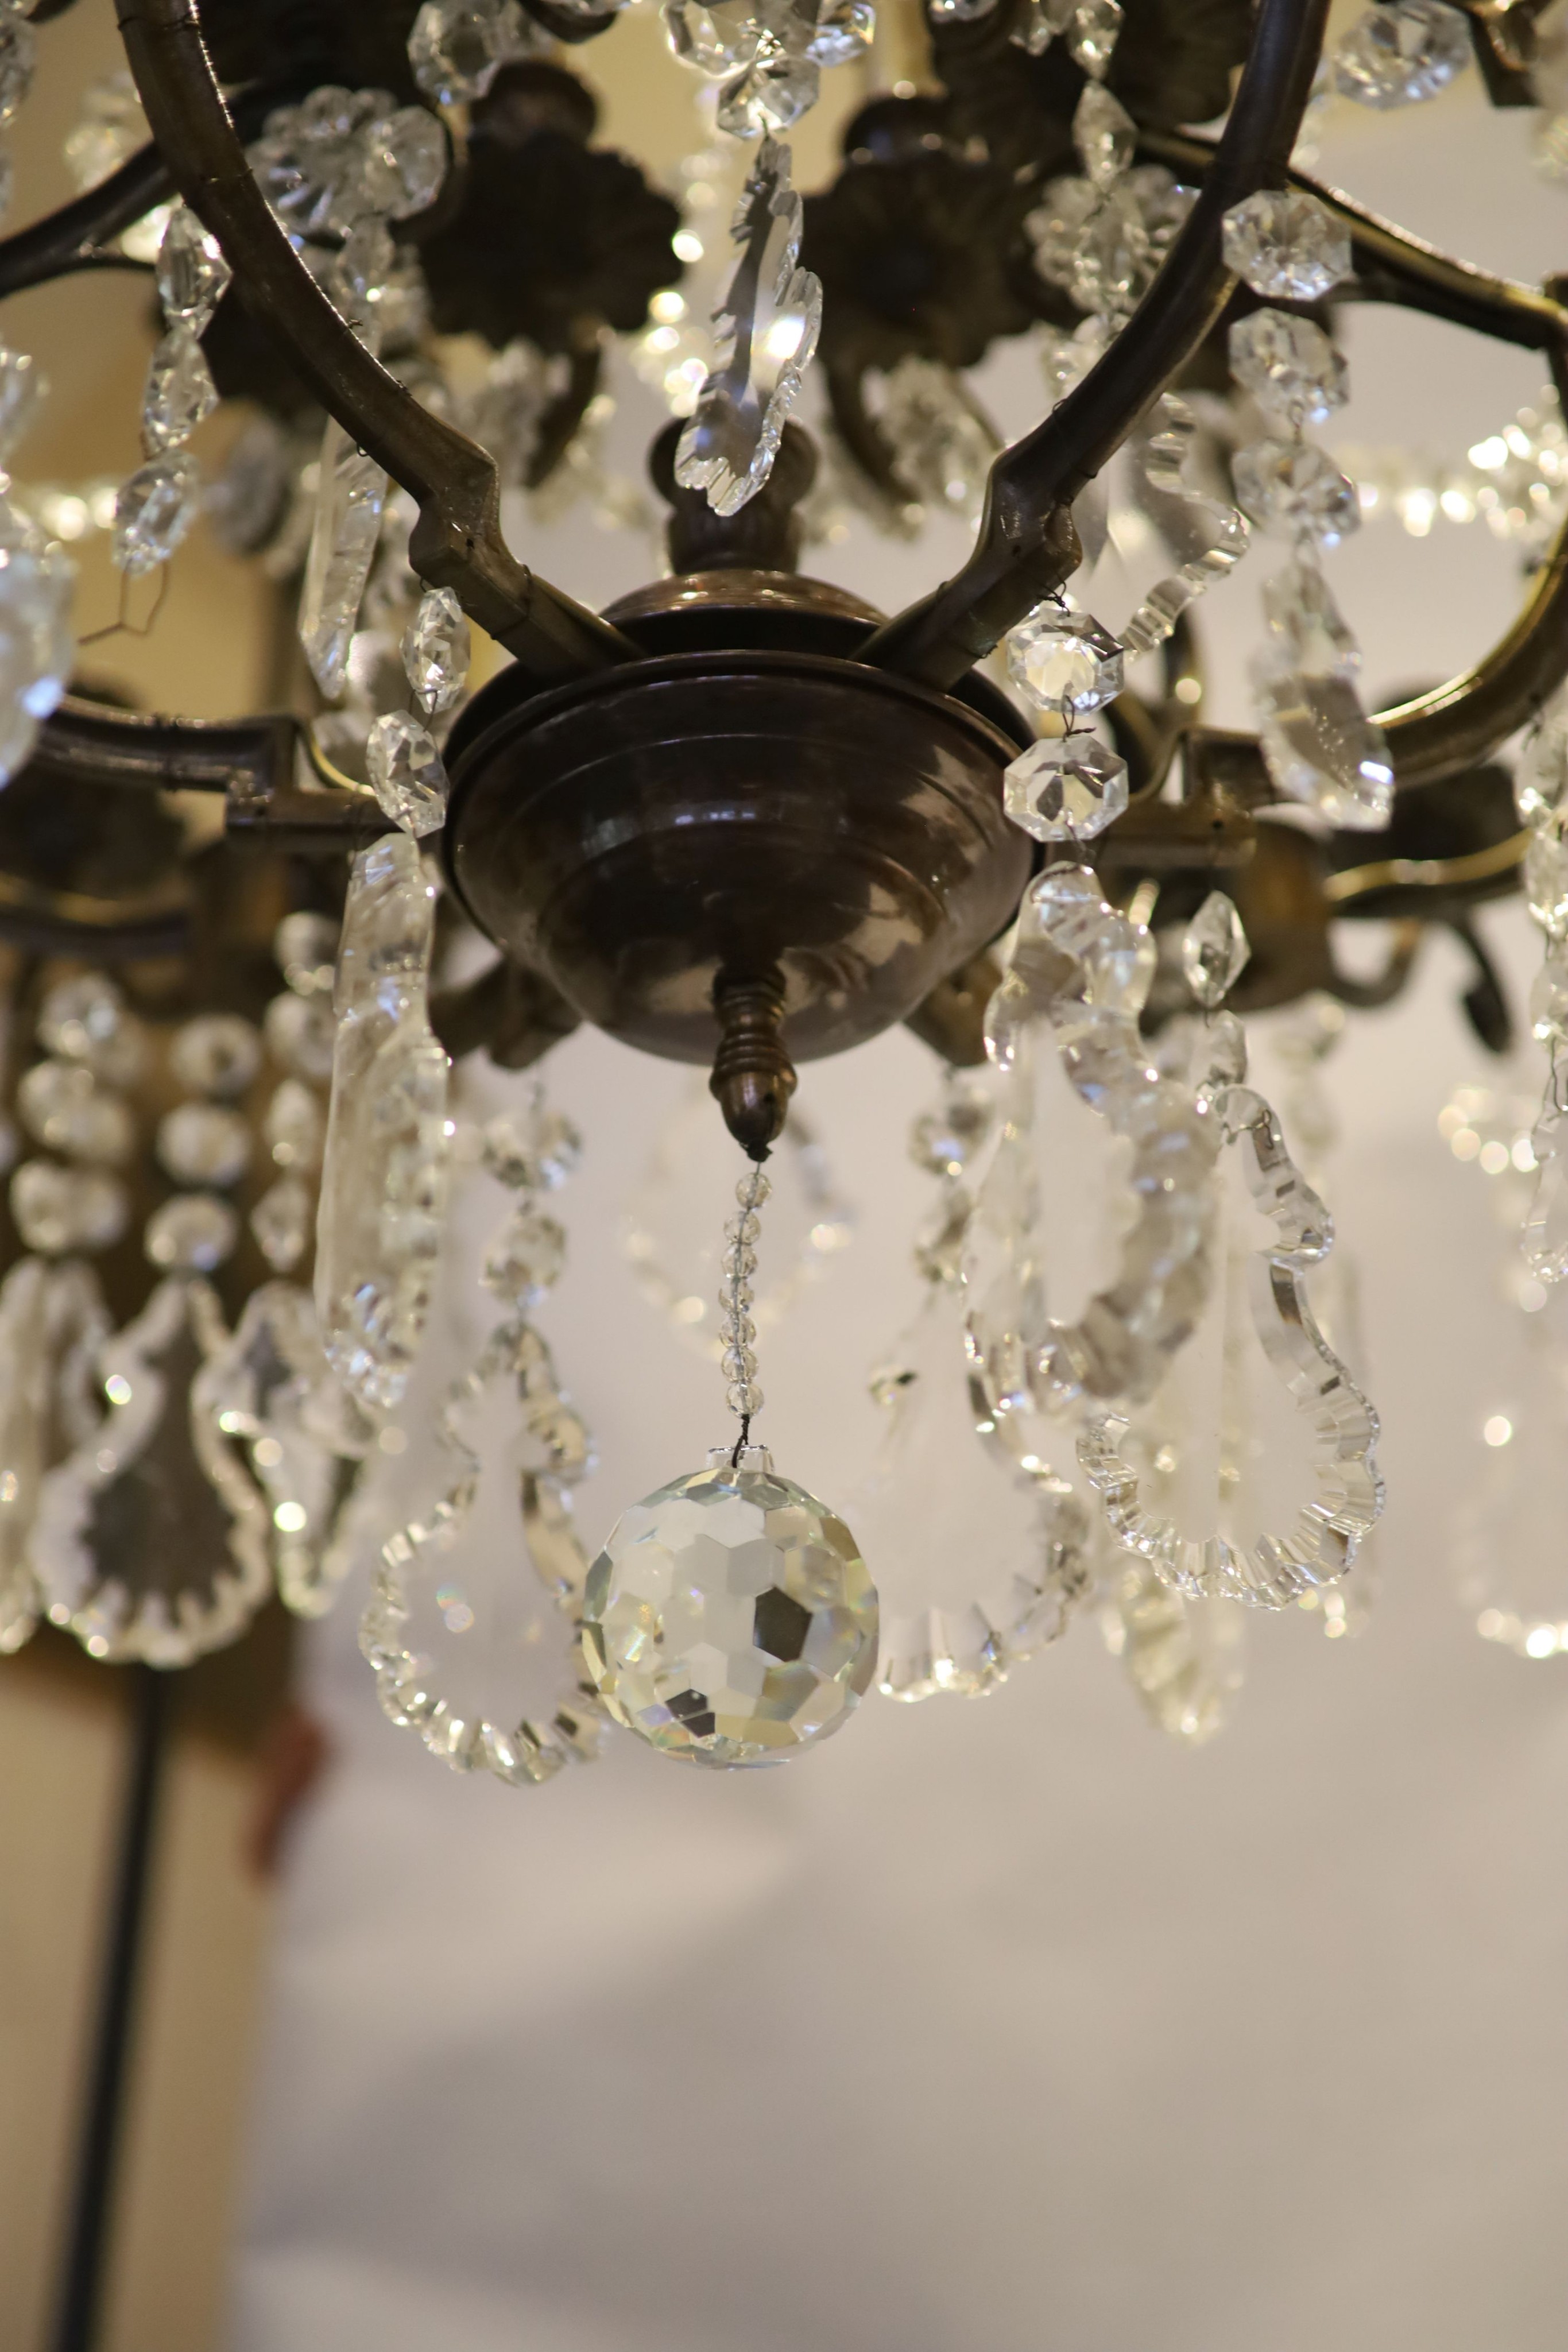 An 18th century style bronzed metal, cut glass 30 light chandelier by Christopher Wray, approximately 123 cm high